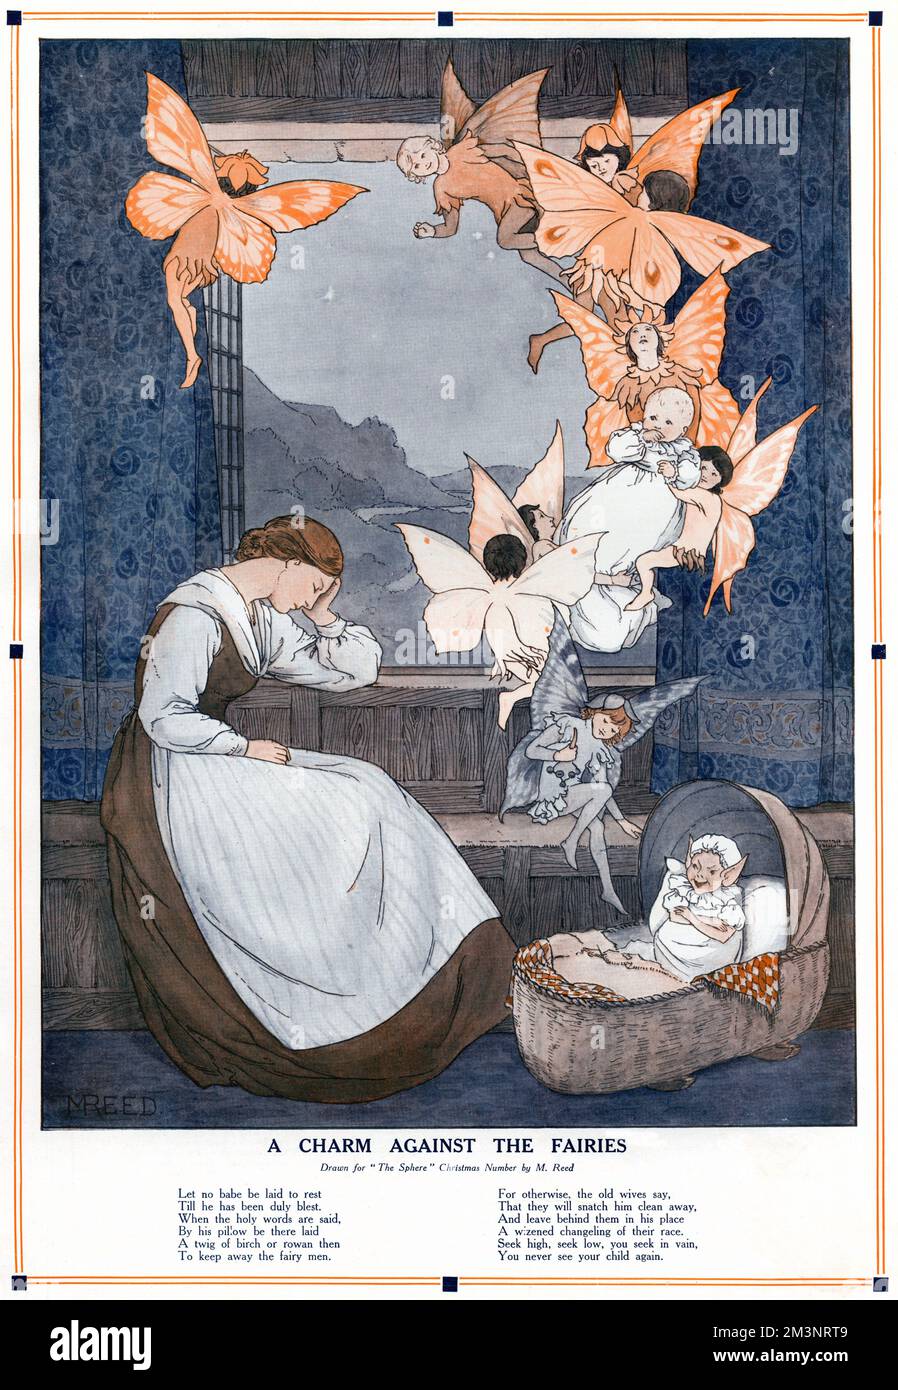 A rather alarming illustration (at least to any new parents) depicting a baby being spirited away by fairies who leave a 'wizened changeling of their race' in its place while its mother sleeps.  Fortunately, a poem below advises a prayer to bless the child before bedtime to avoid any unfortunate occurrence.       Date: 1911 Stock Photo